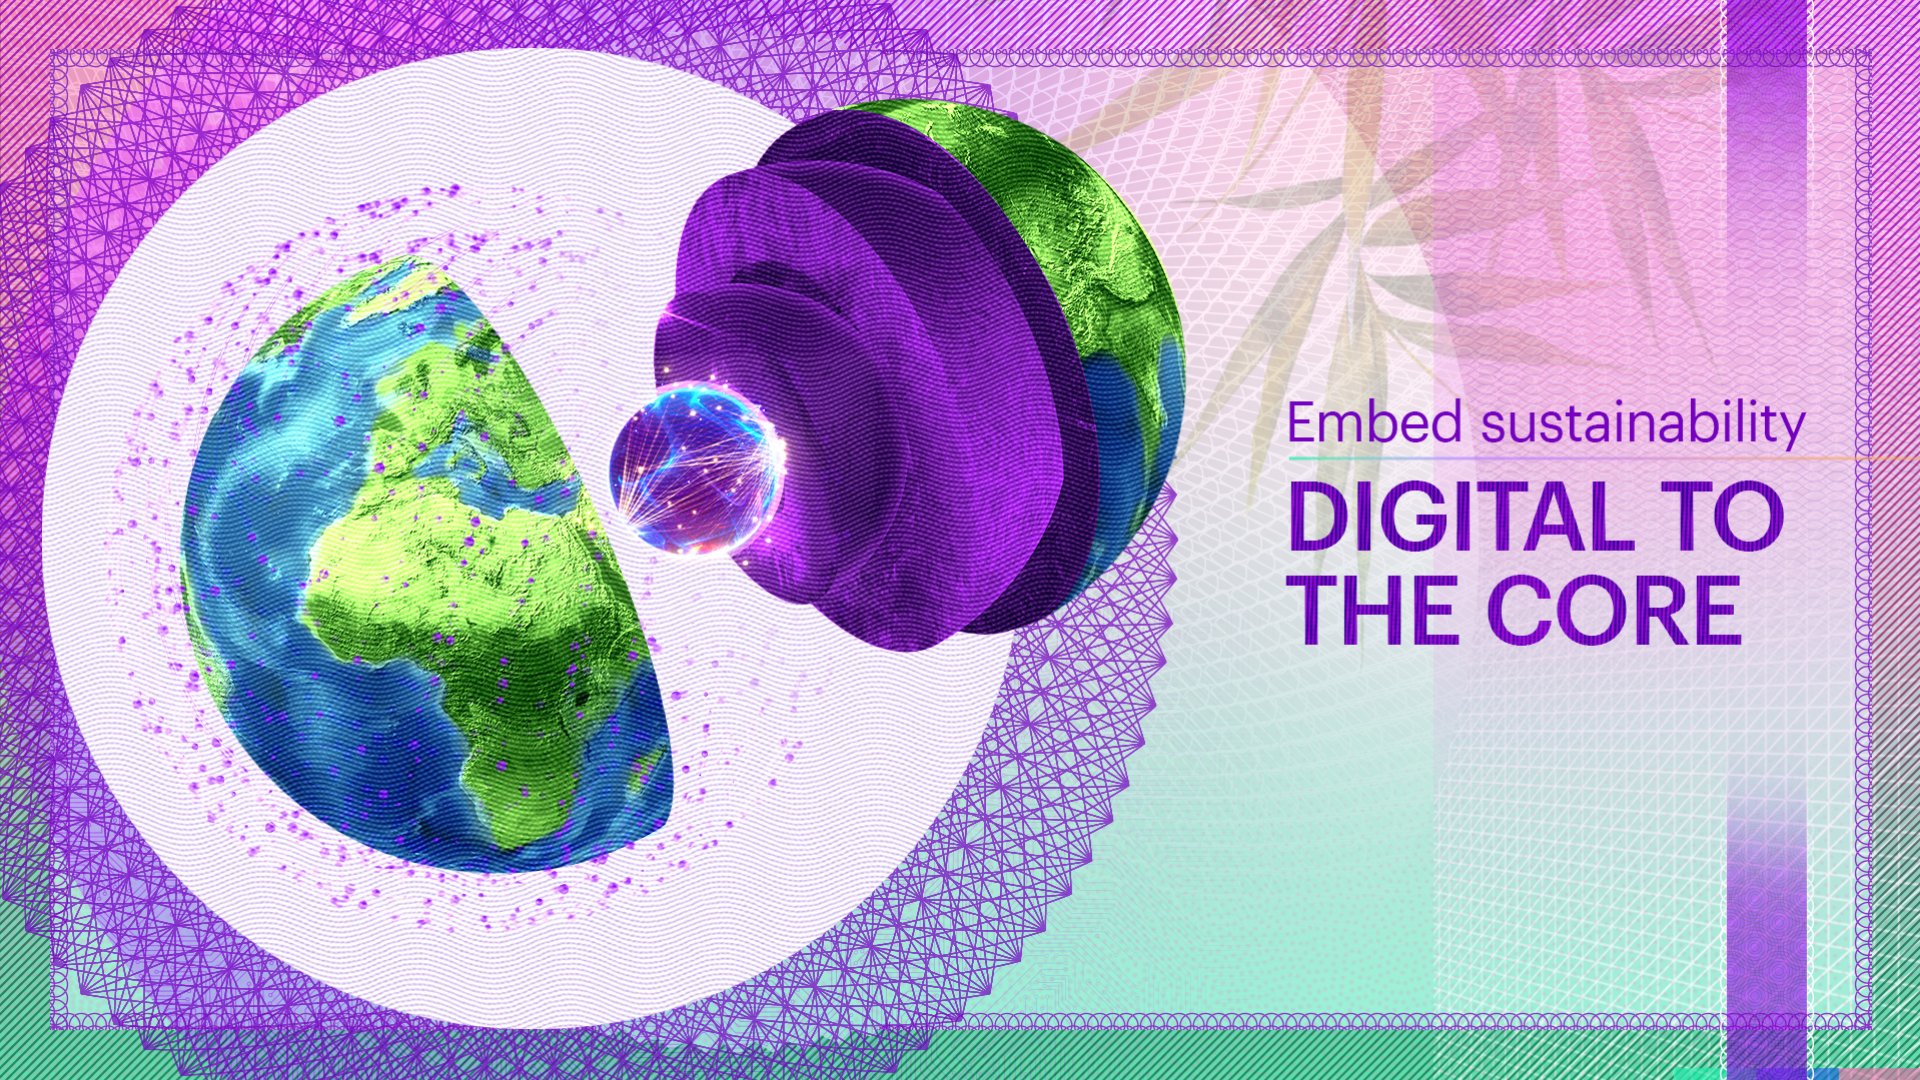 Embed sustainability. Digital to the core.